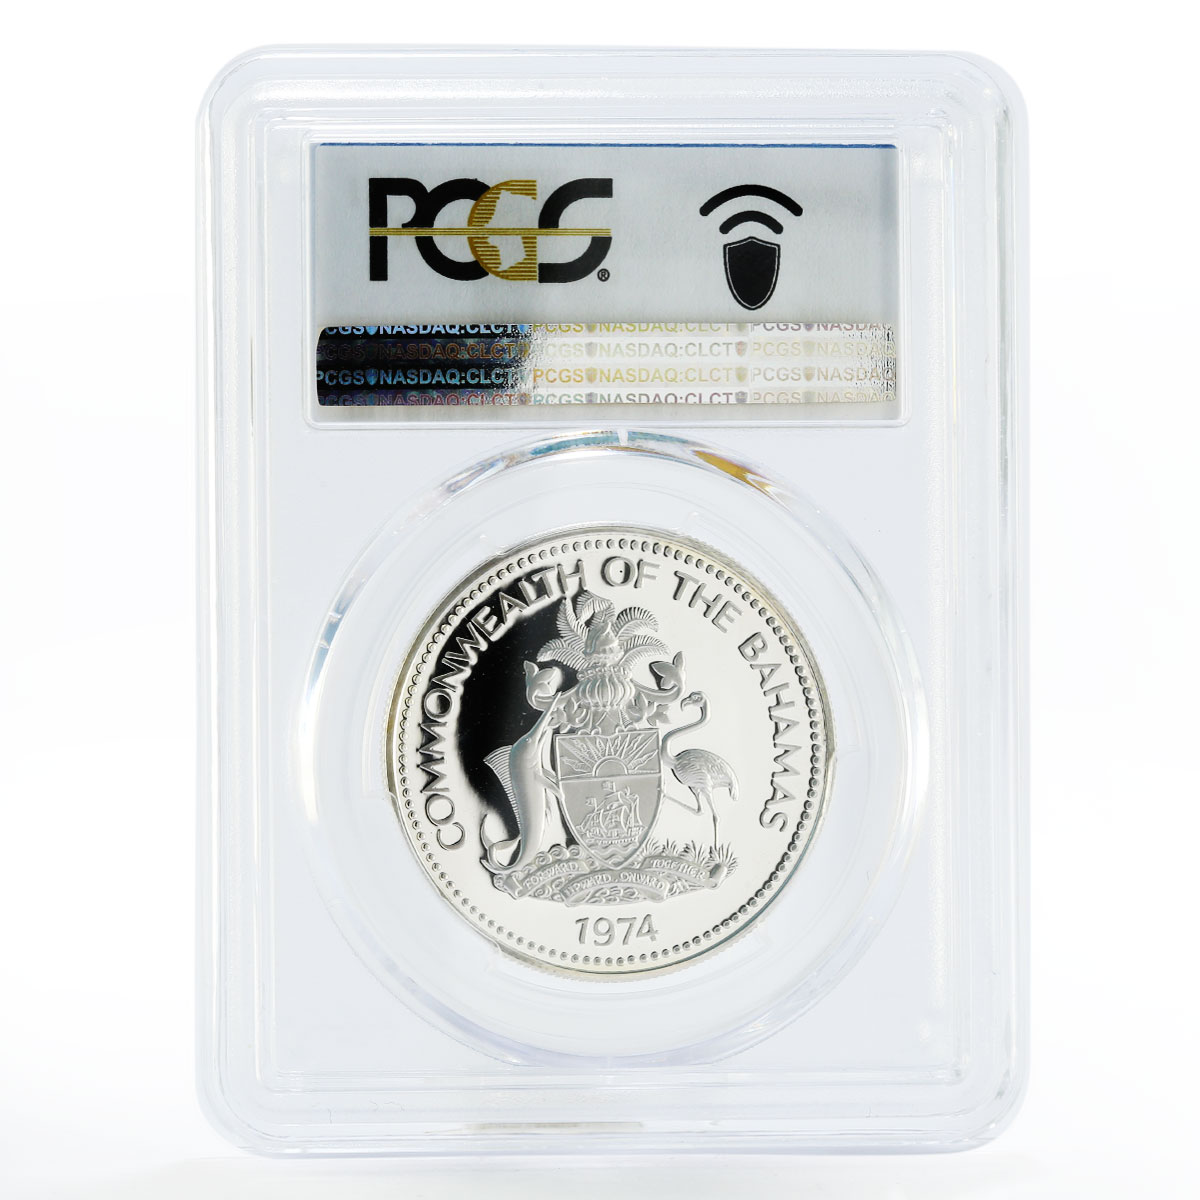 Bahamas 1 dollar The Shell PR70 PCGS proof silver coin 1974